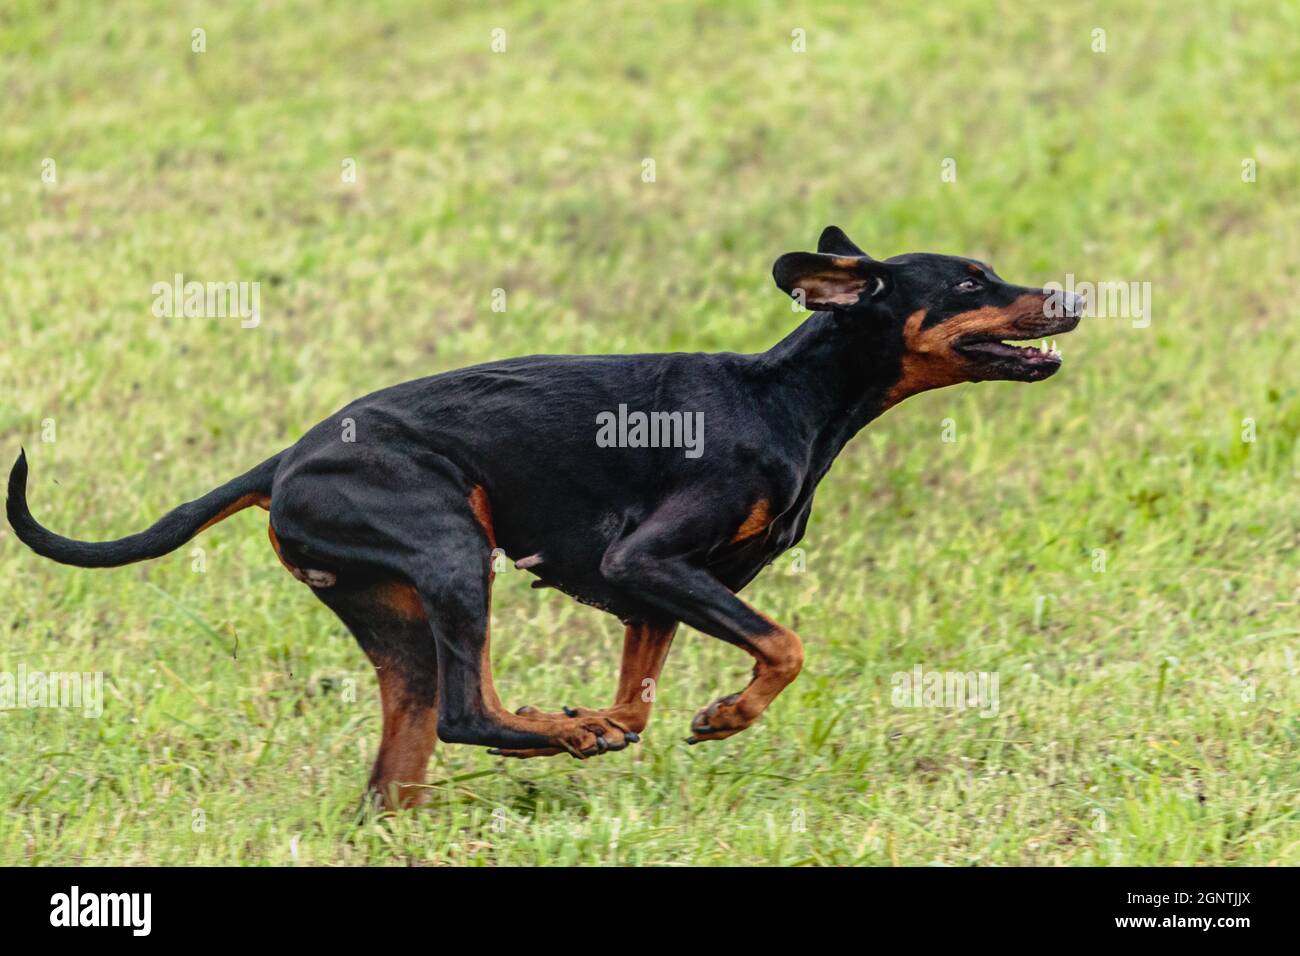 Dobermann dog running and chasing coursing lure on green field Stock Photo